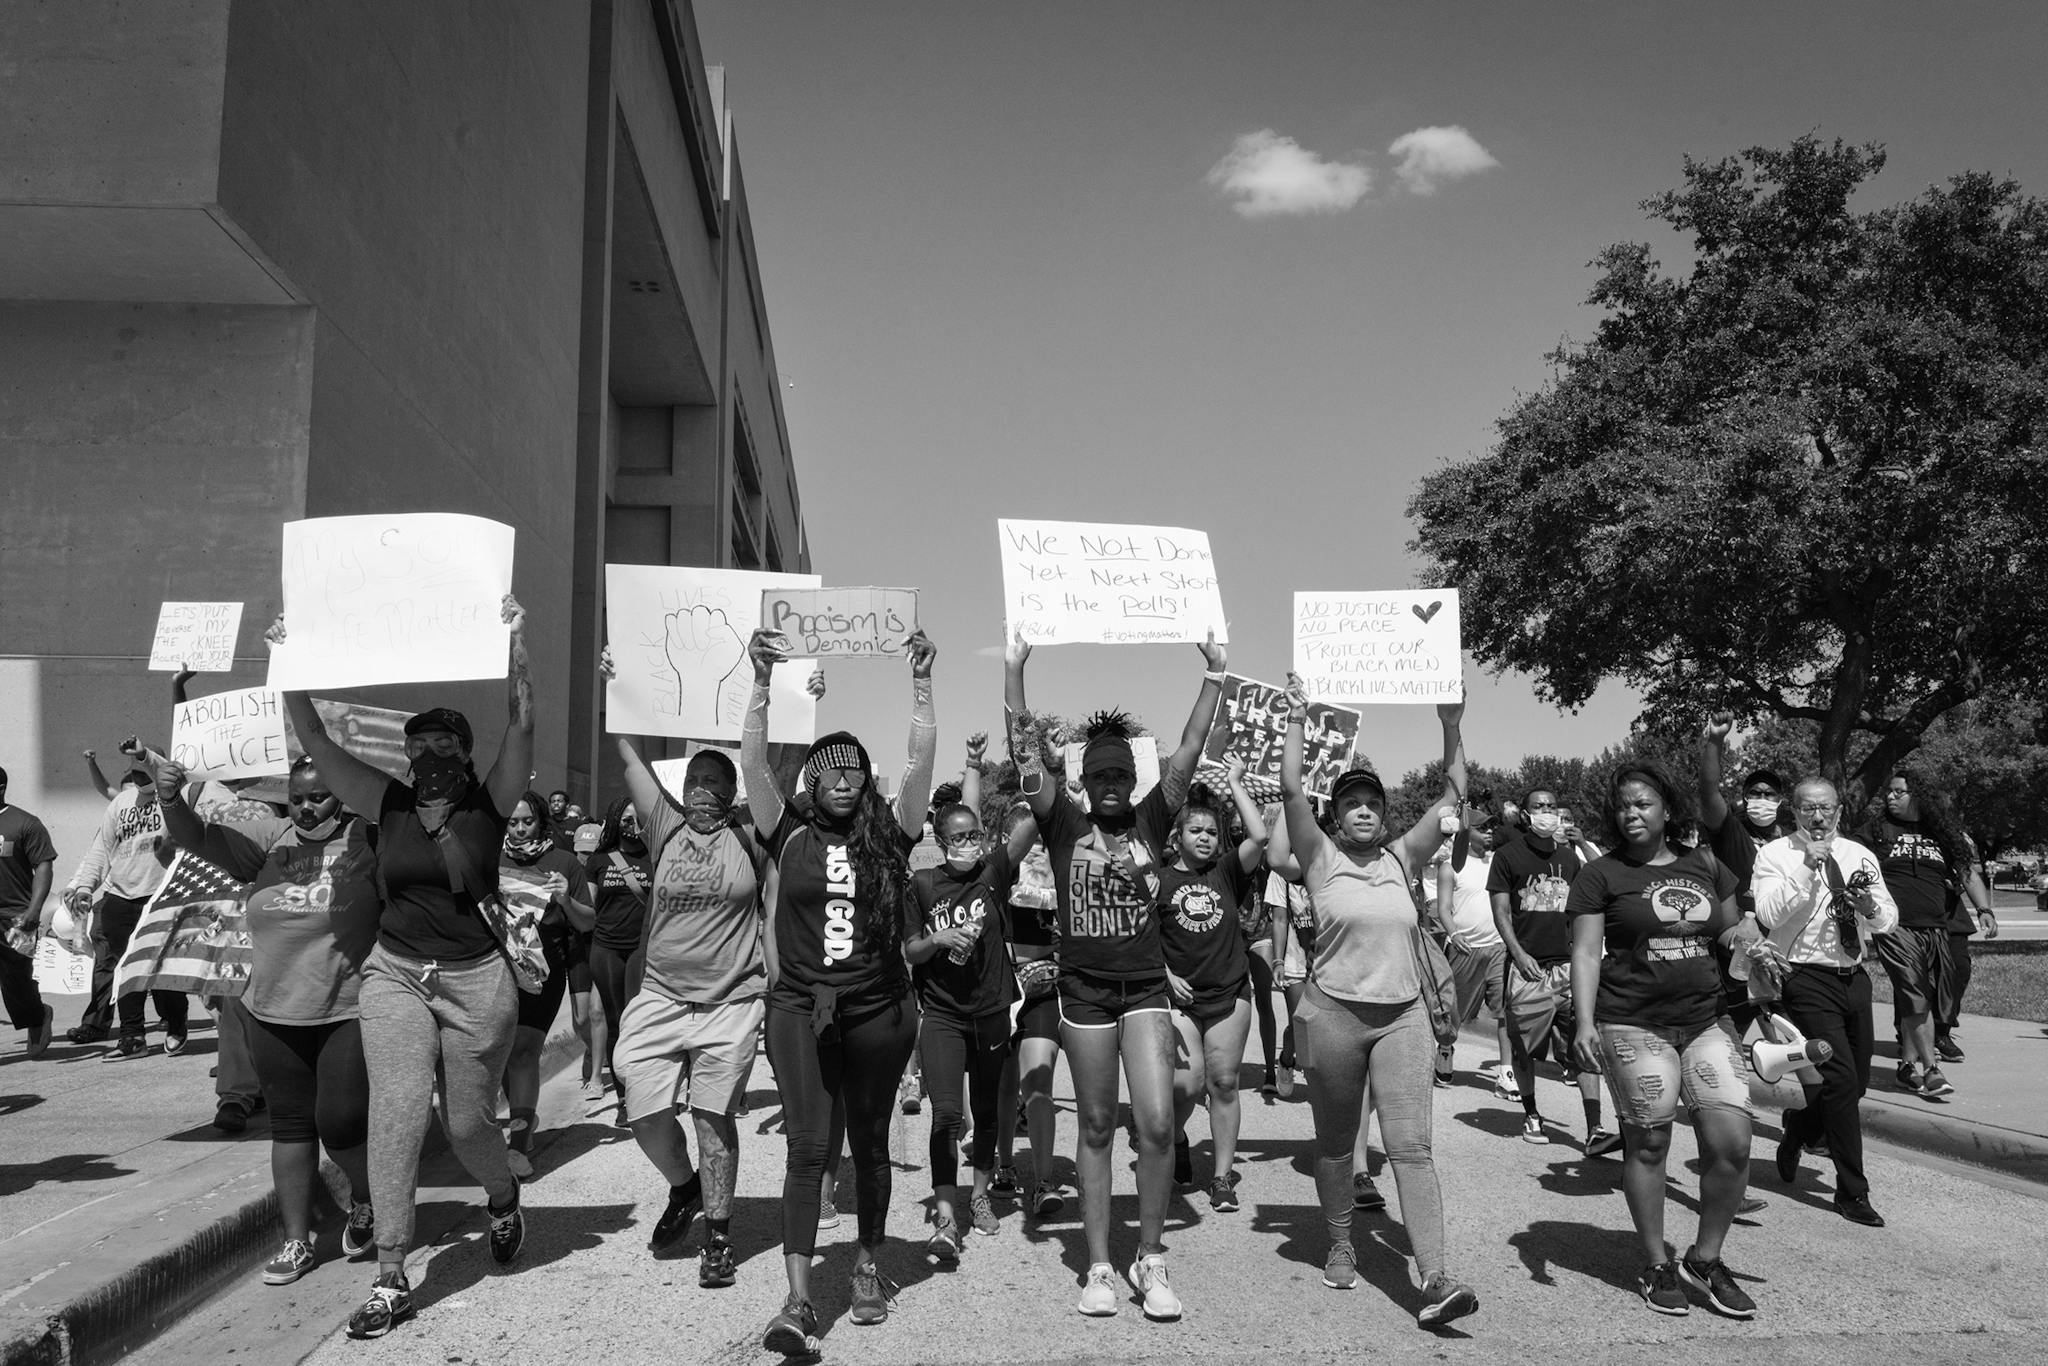 A crowd chants "I can't breathe!" as they march past Dallas City Hall on June 3, 2020.